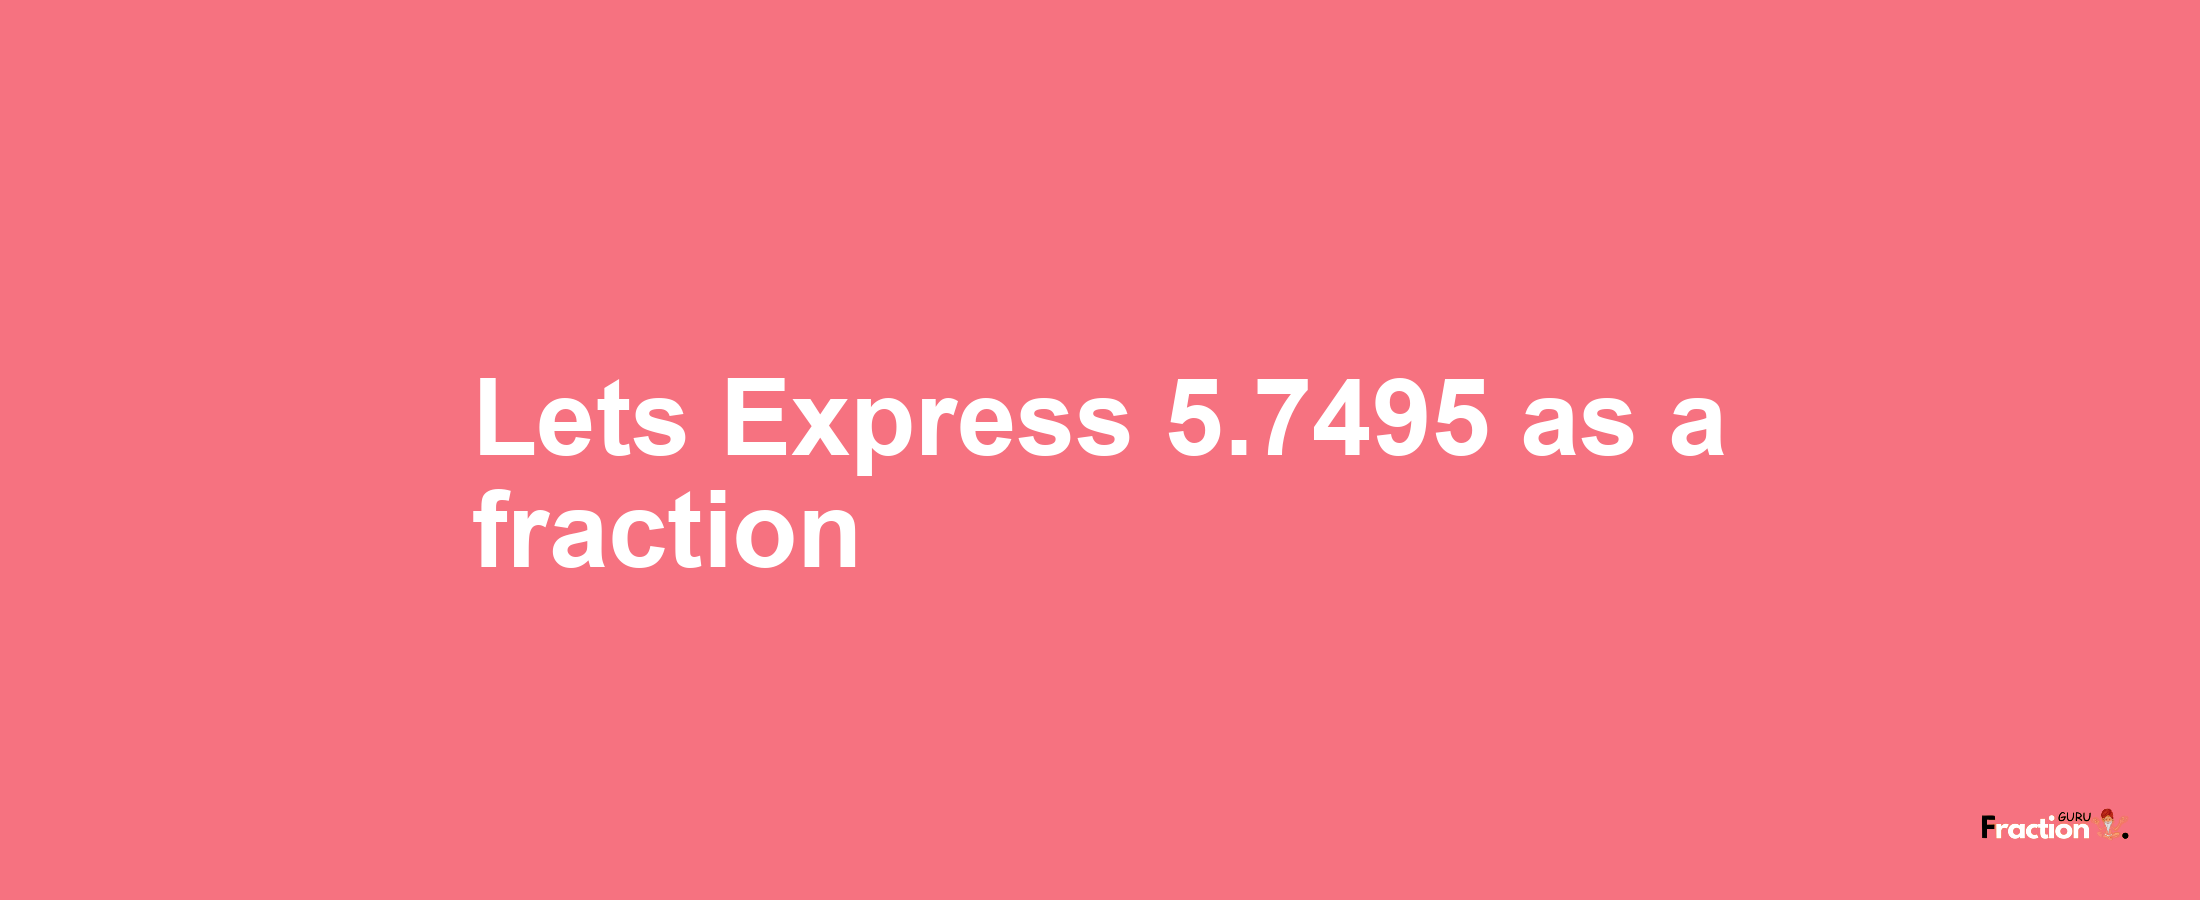 Lets Express 5.7495 as afraction